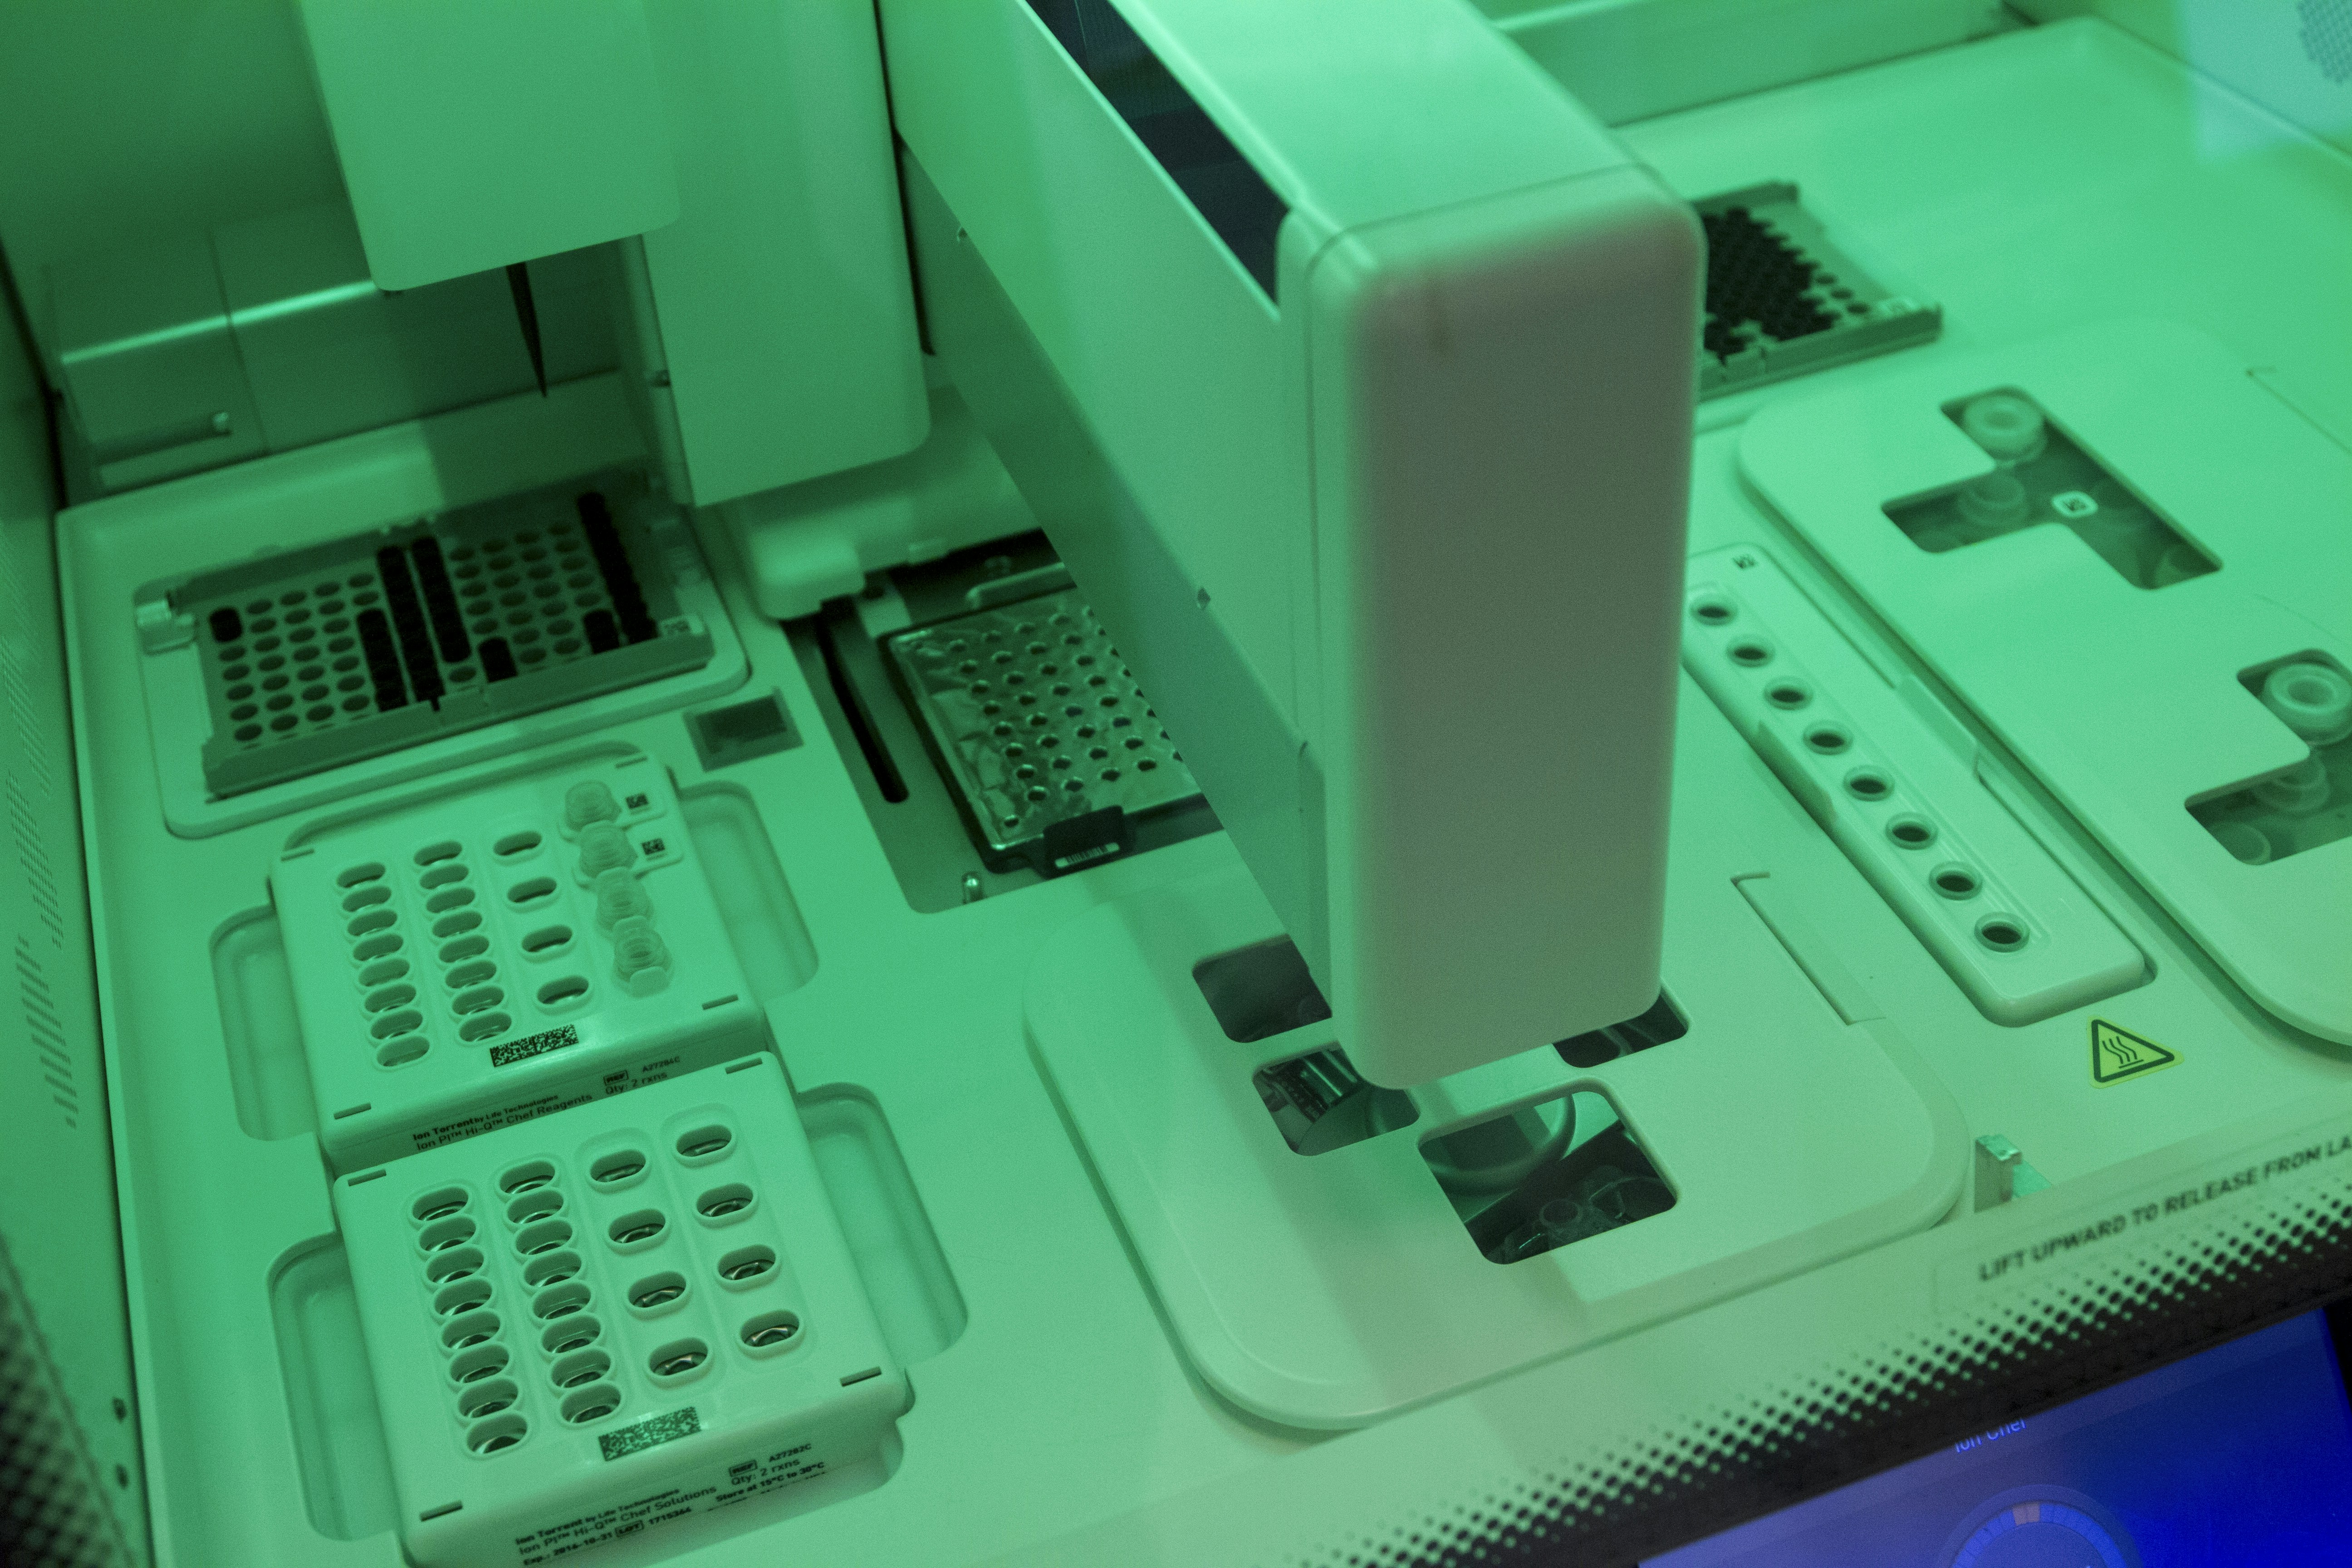 DNA Genotyping and Sequencing. Automated DNA chip loading at the Cancer Genomics Research Laboratory, part of the National Cancer Institute's Division of Cancer Epidemiology and Genetics (DCEG).